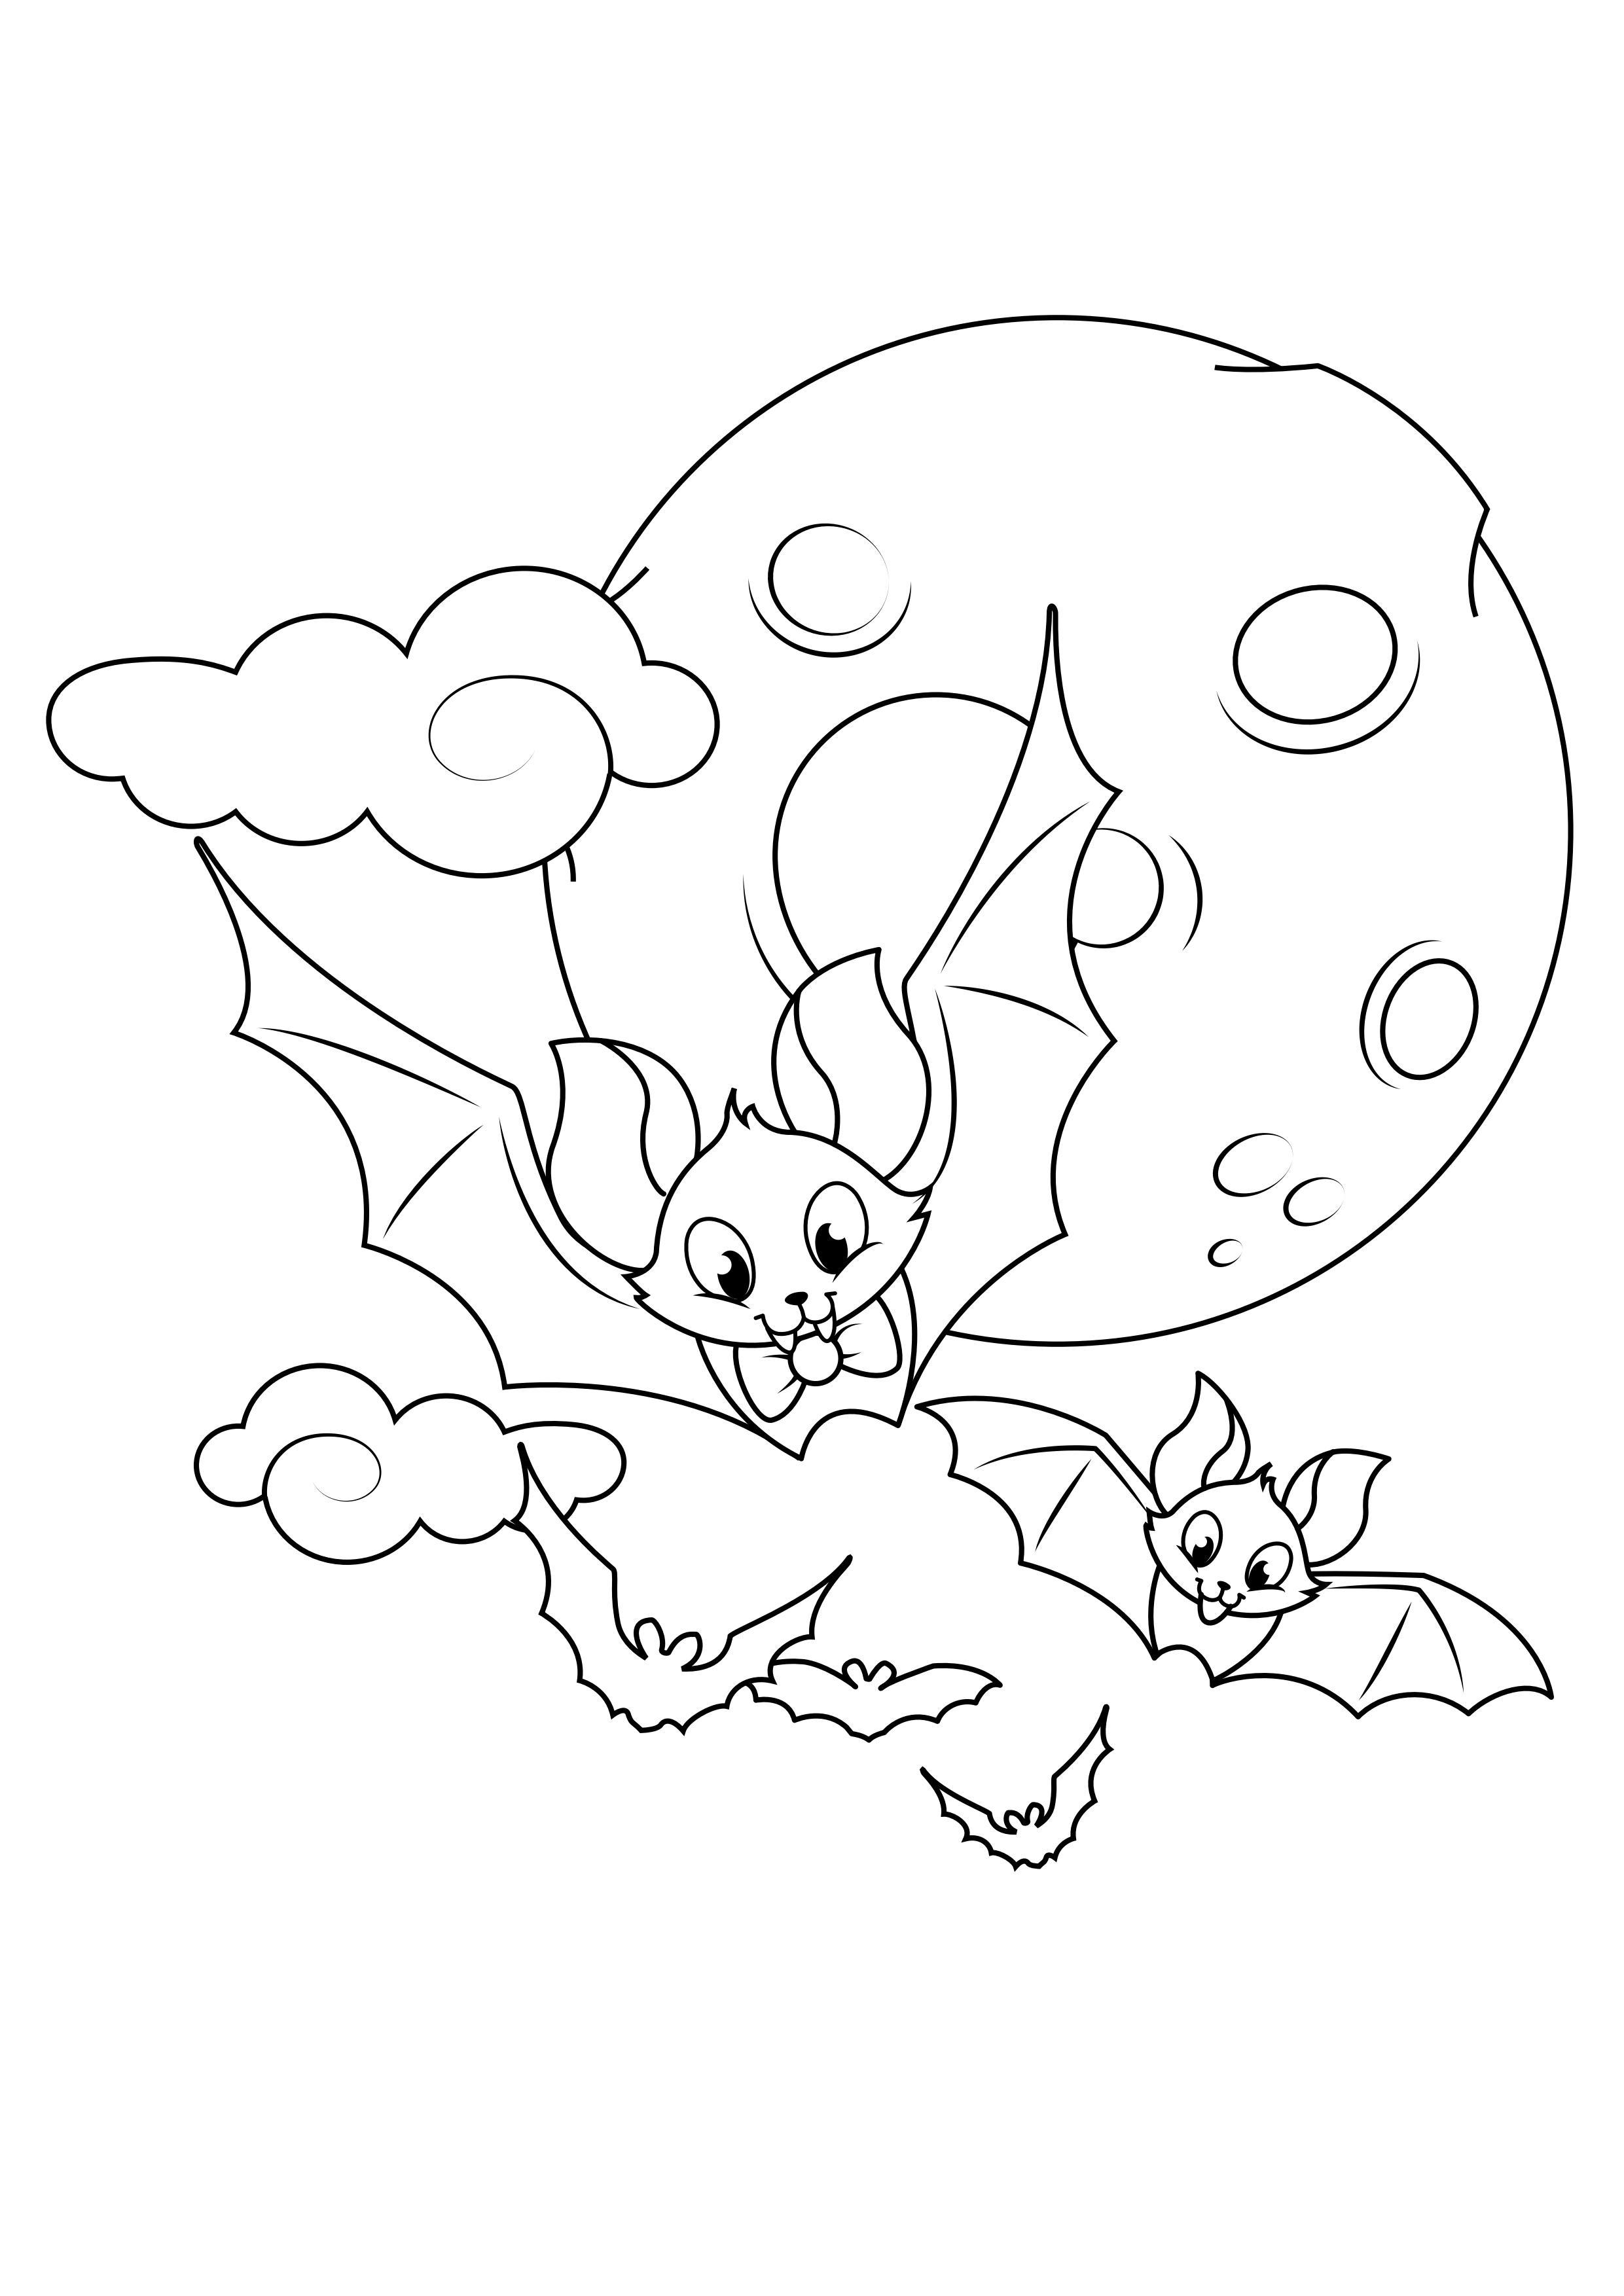 Coloring Page bats at full moon   free printable coloring pages ...